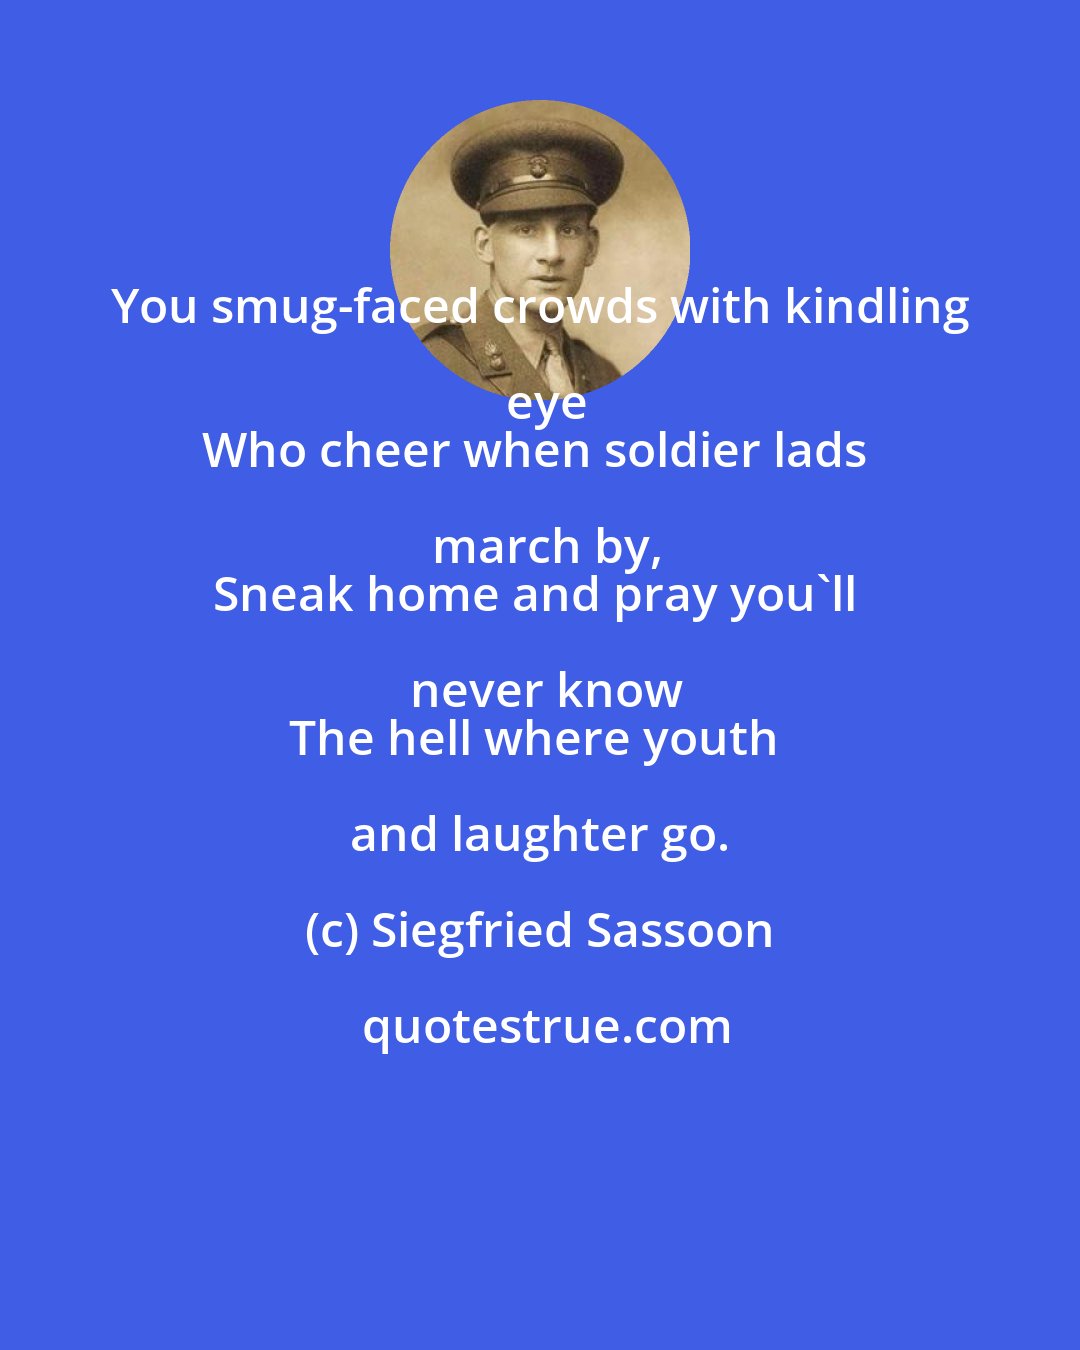 Siegfried Sassoon: You smug-faced crowds with kindling eye
Who cheer when soldier lads march by,
Sneak home and pray you'll never know
The hell where youth and laughter go.